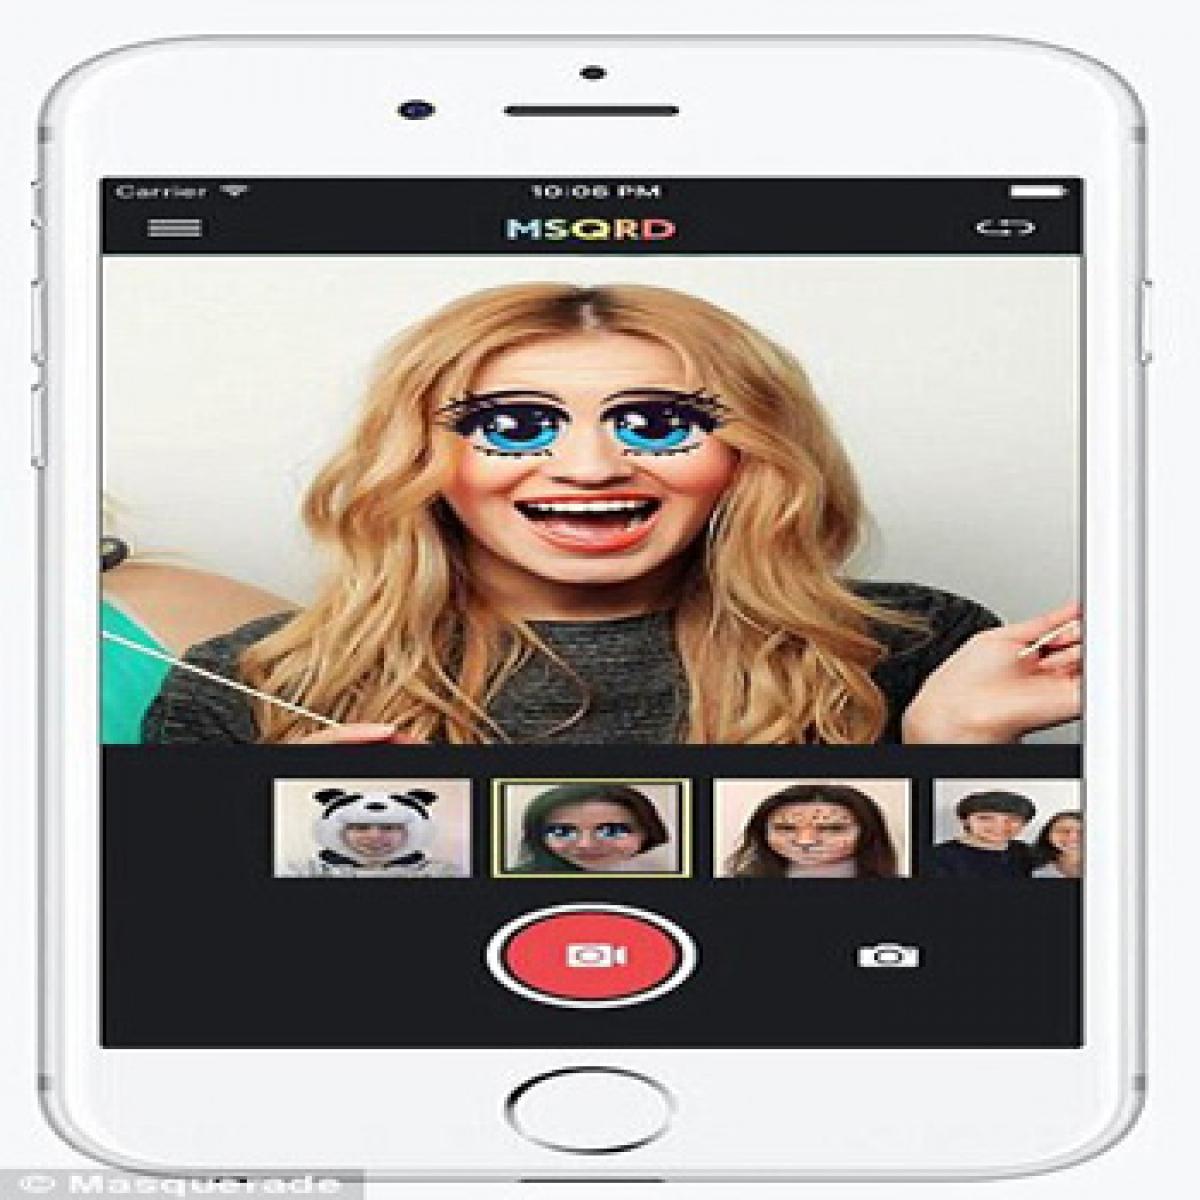 Facebook buys filters app Masquerade to counter Snapchat